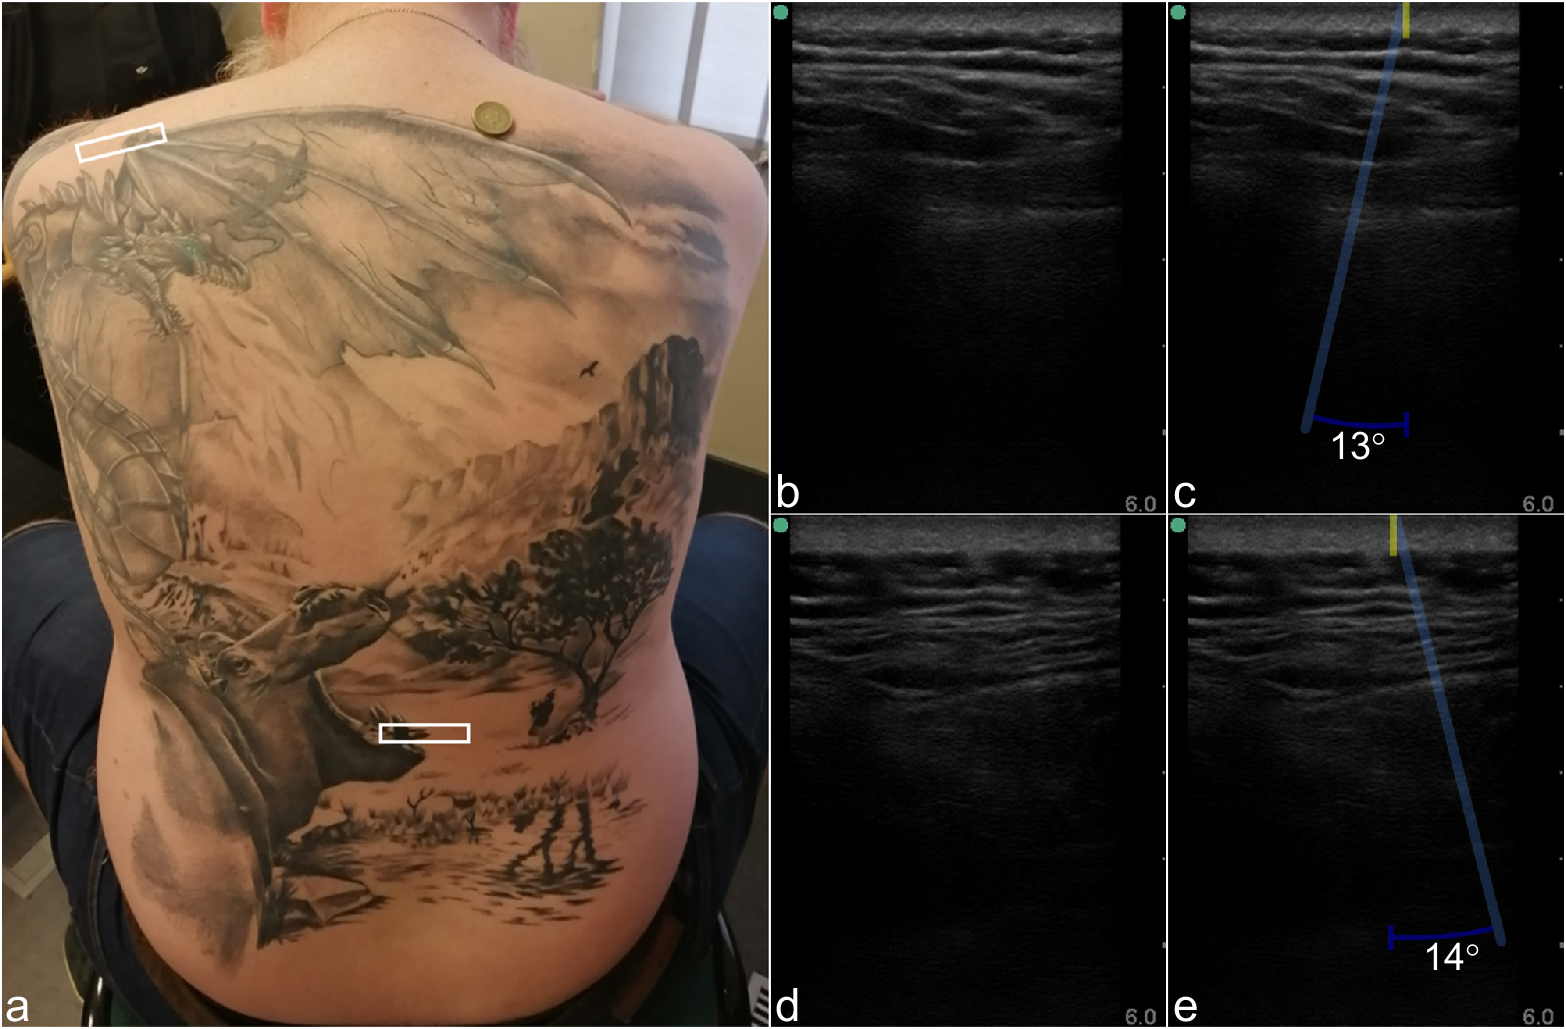 Ultrasound images of a back tattoo.